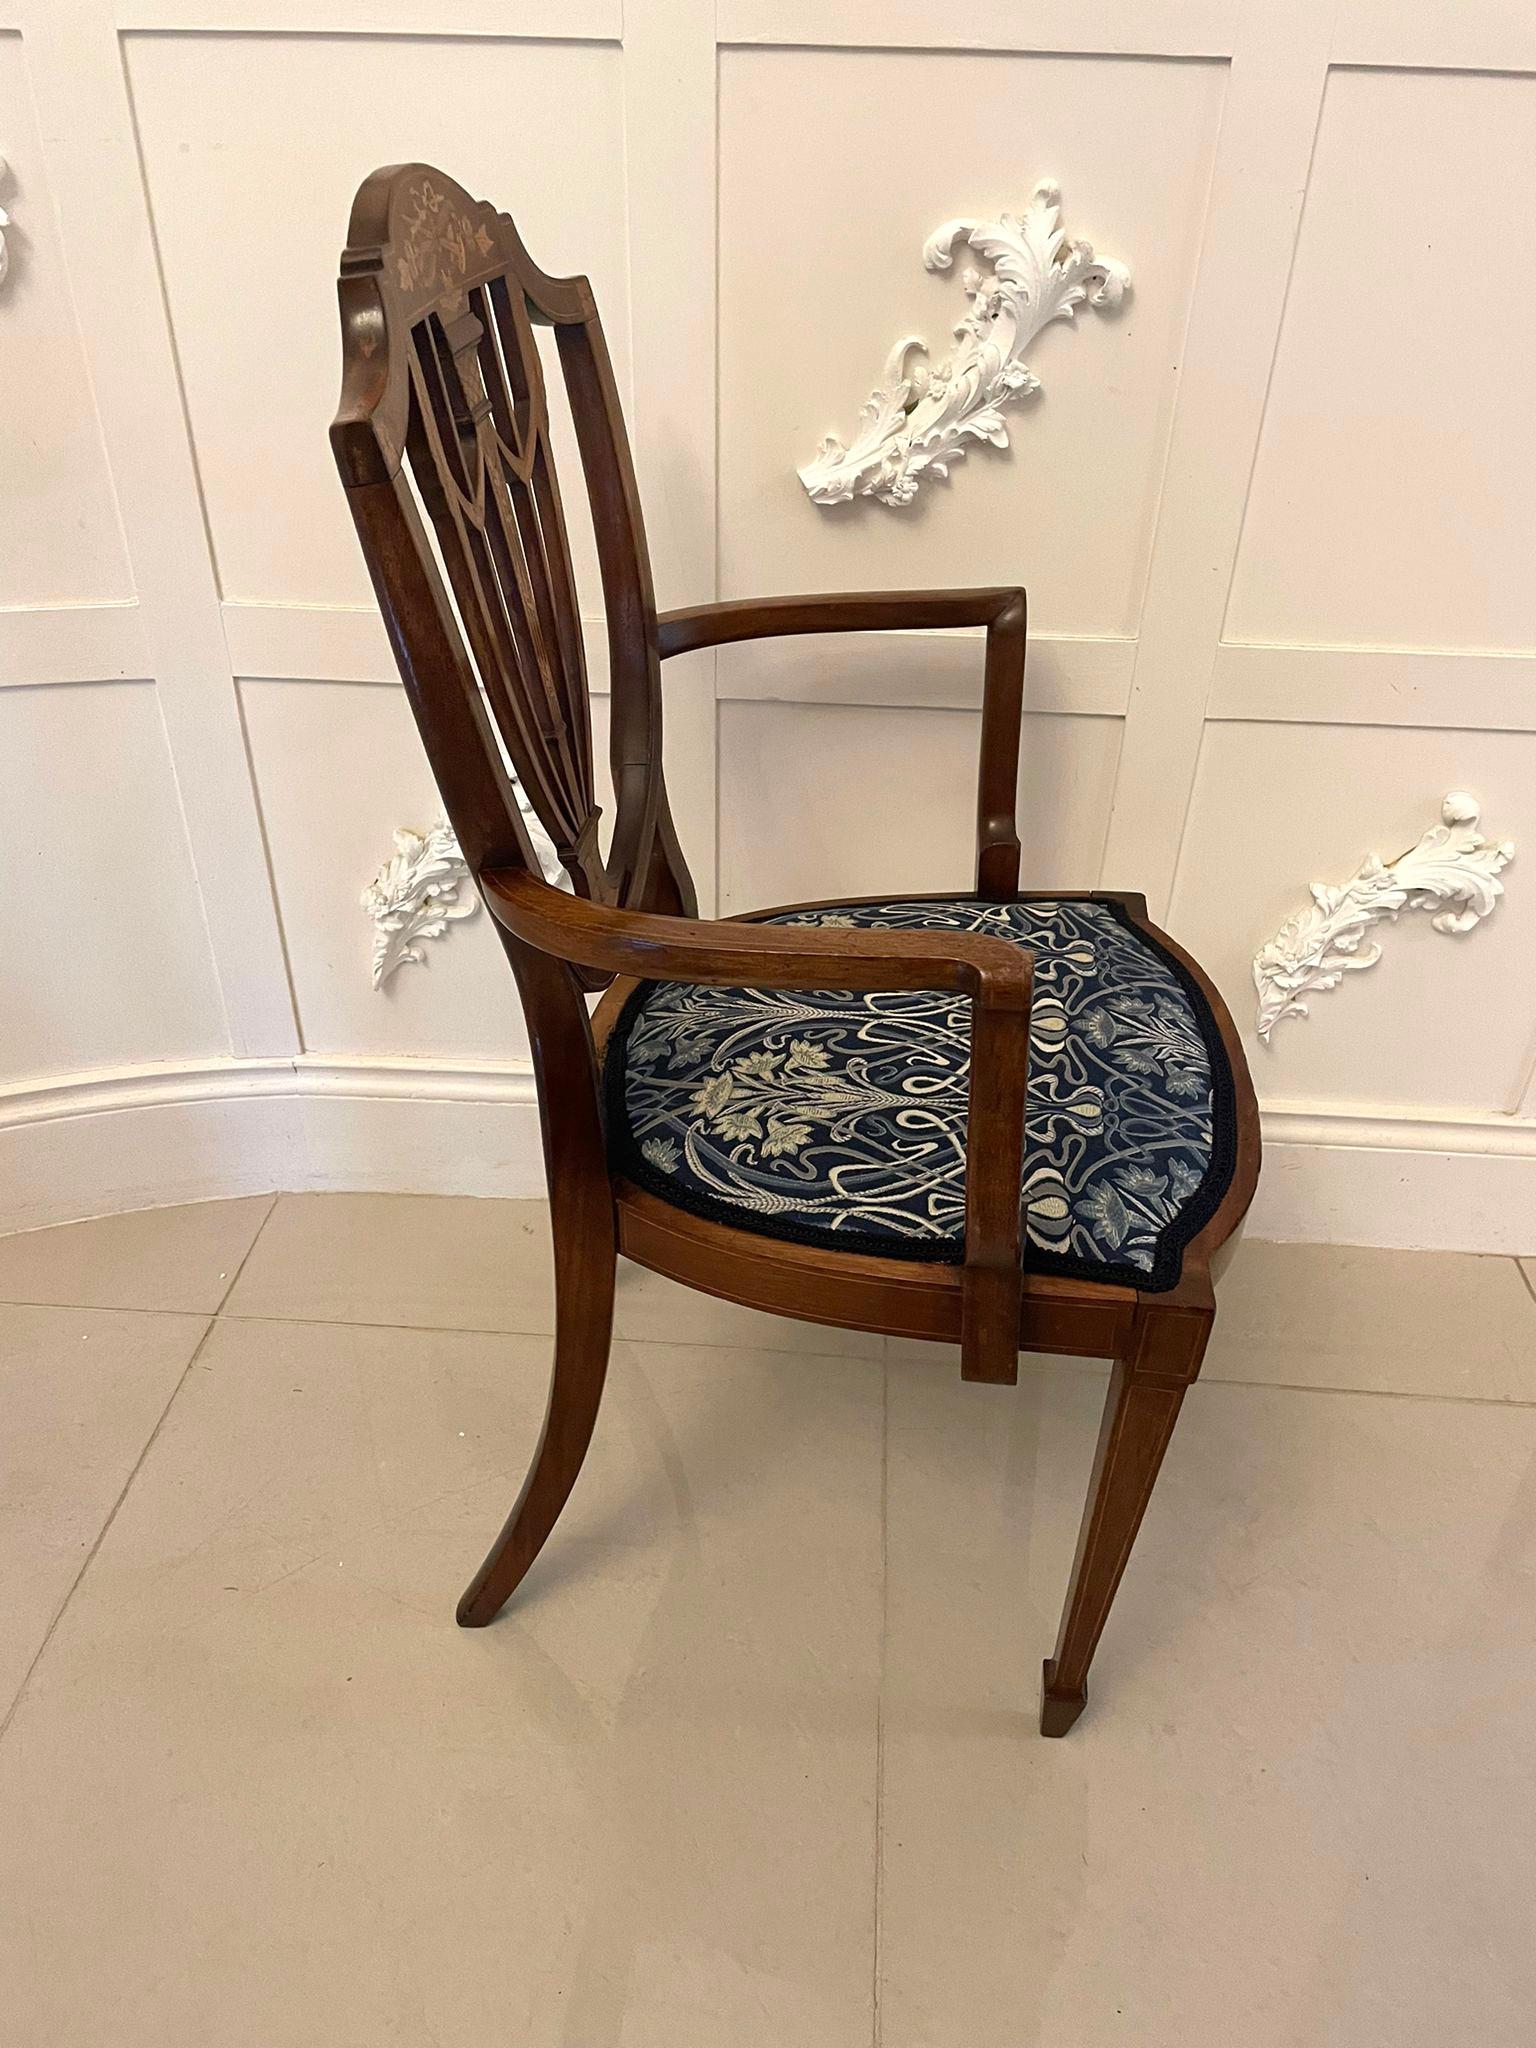 English Fine Quality Antique Mahogany Inlaid Desk Chair For Sale